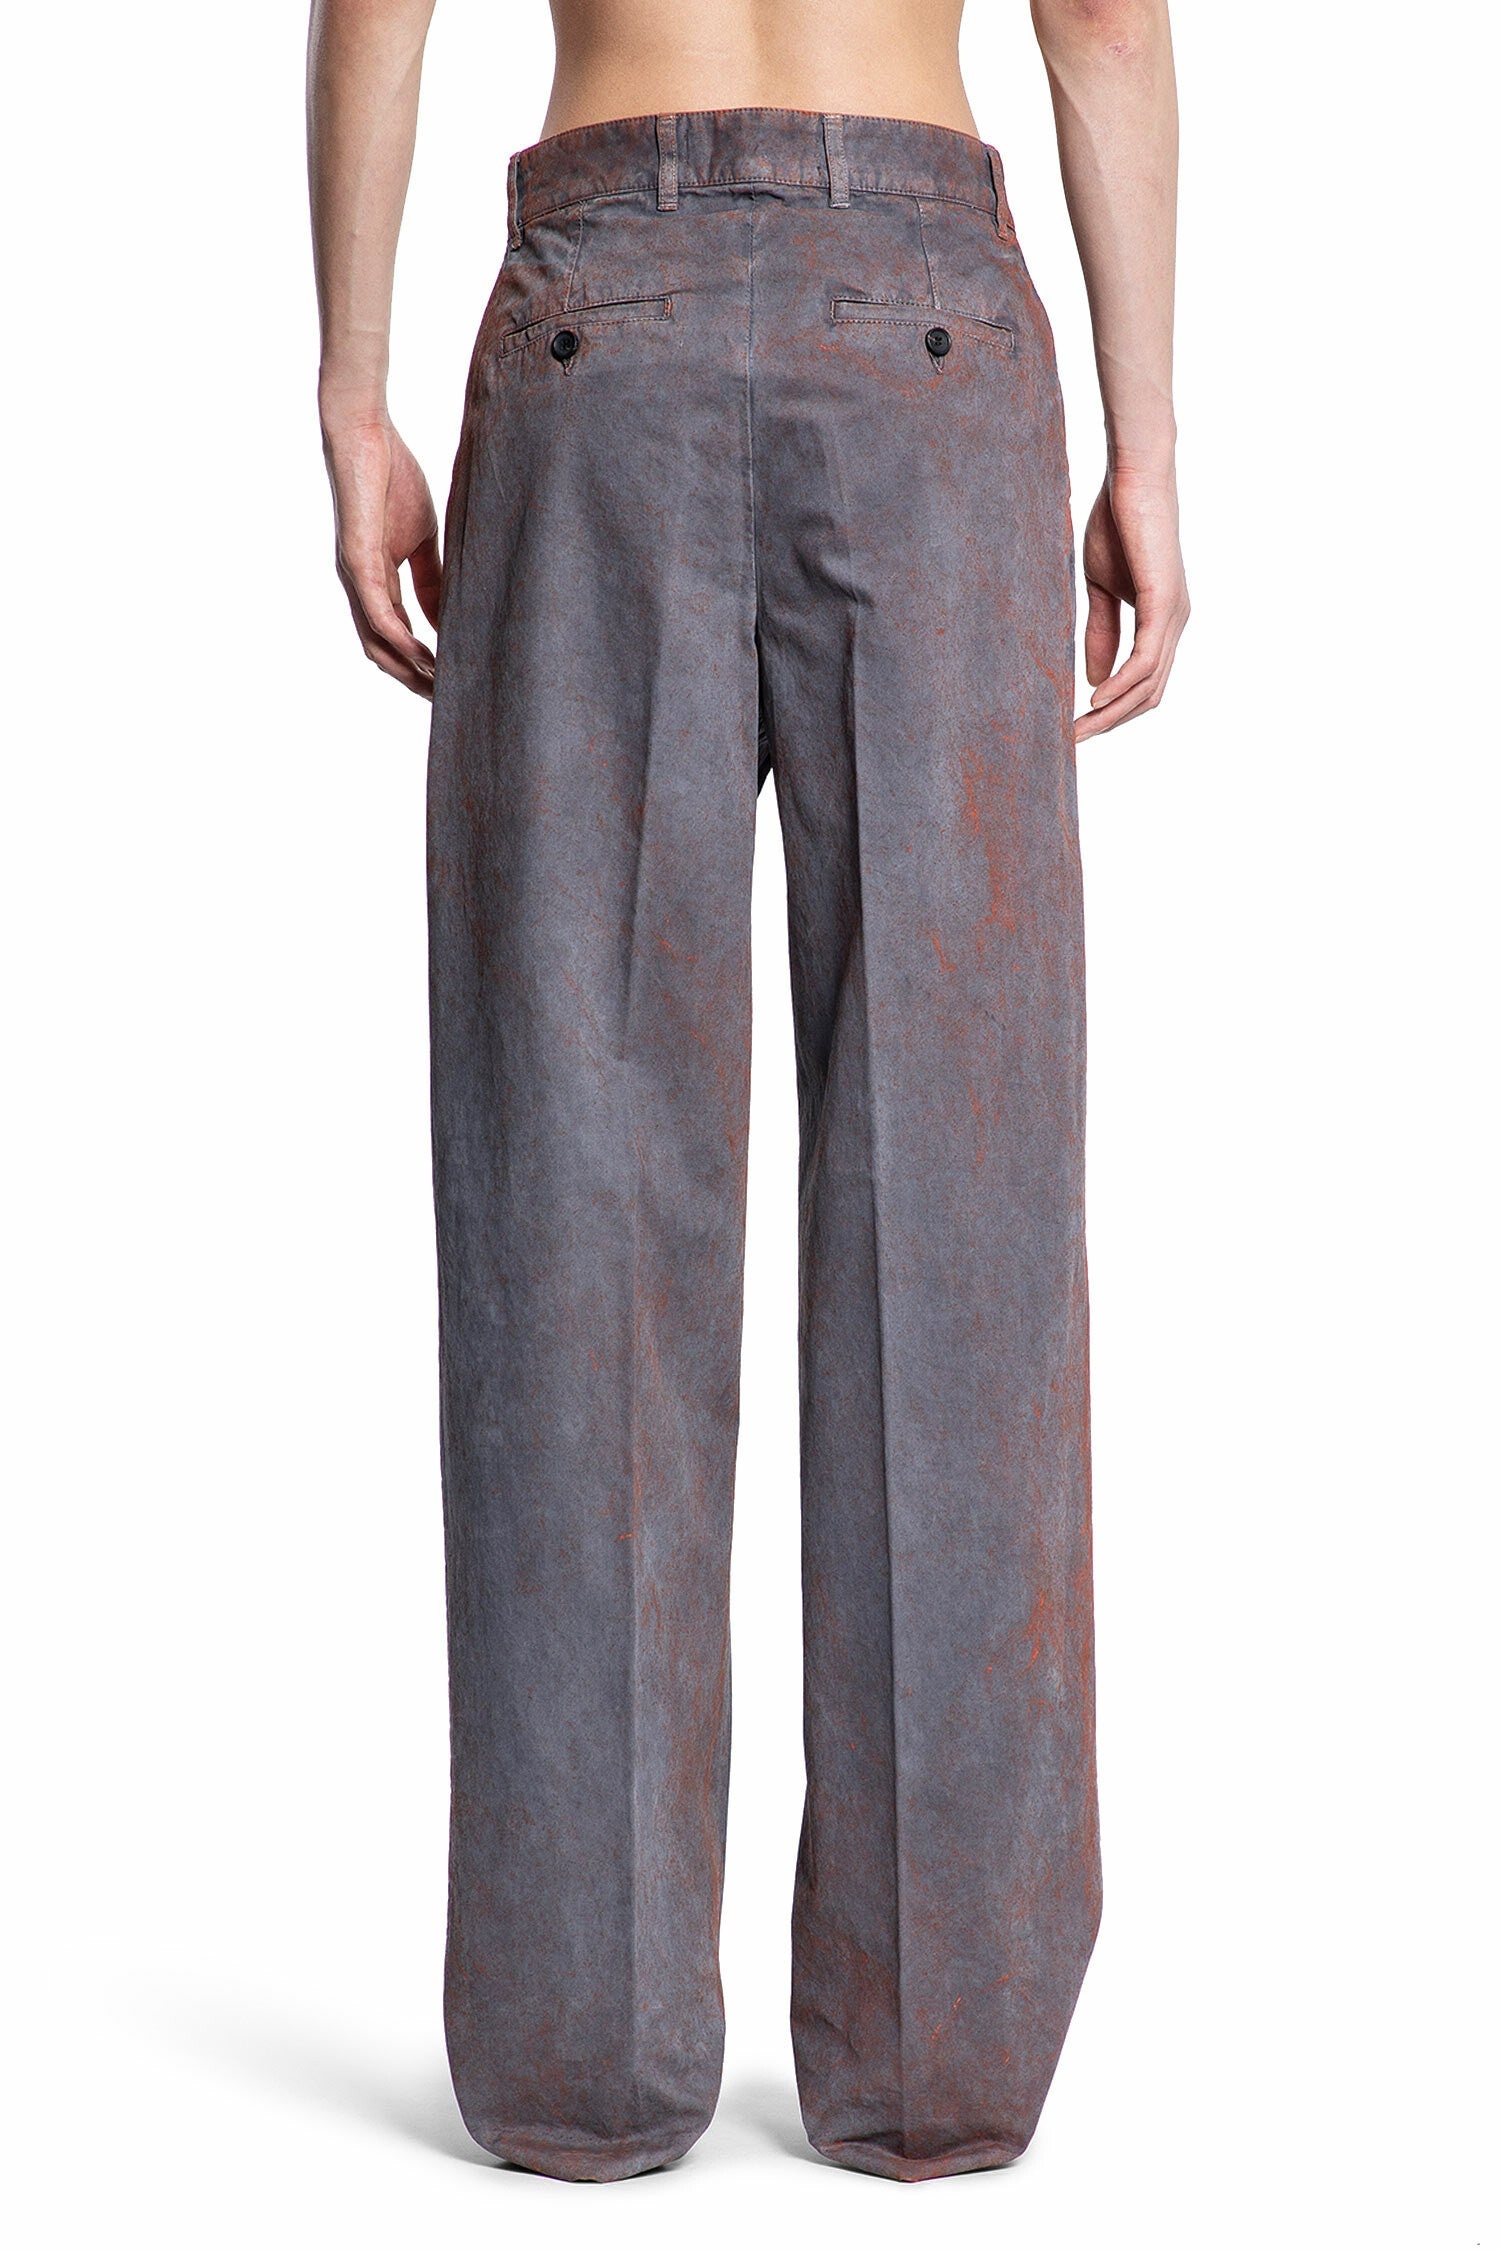 Y/PROJECT MAN GREY TROUSERS - 4